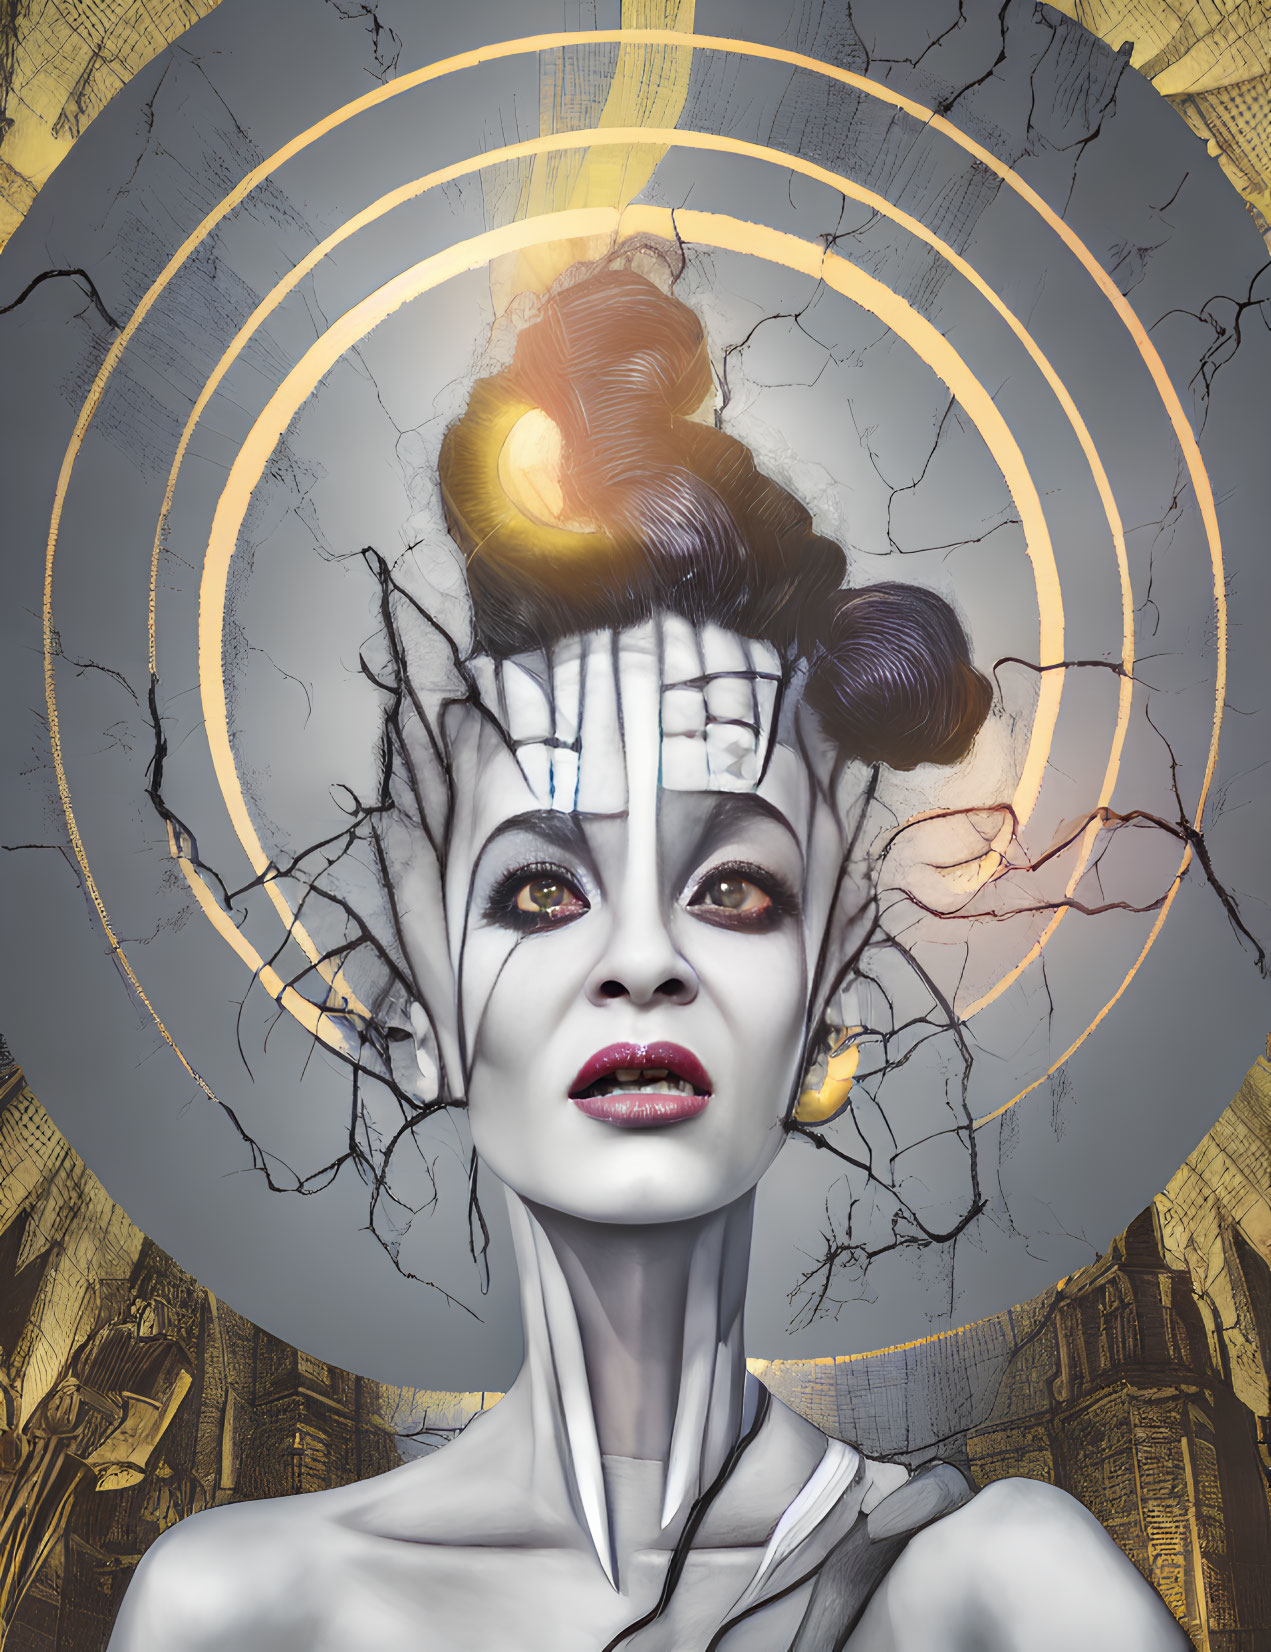 Stylized portrait of woman with white body paint and glowing headpiece